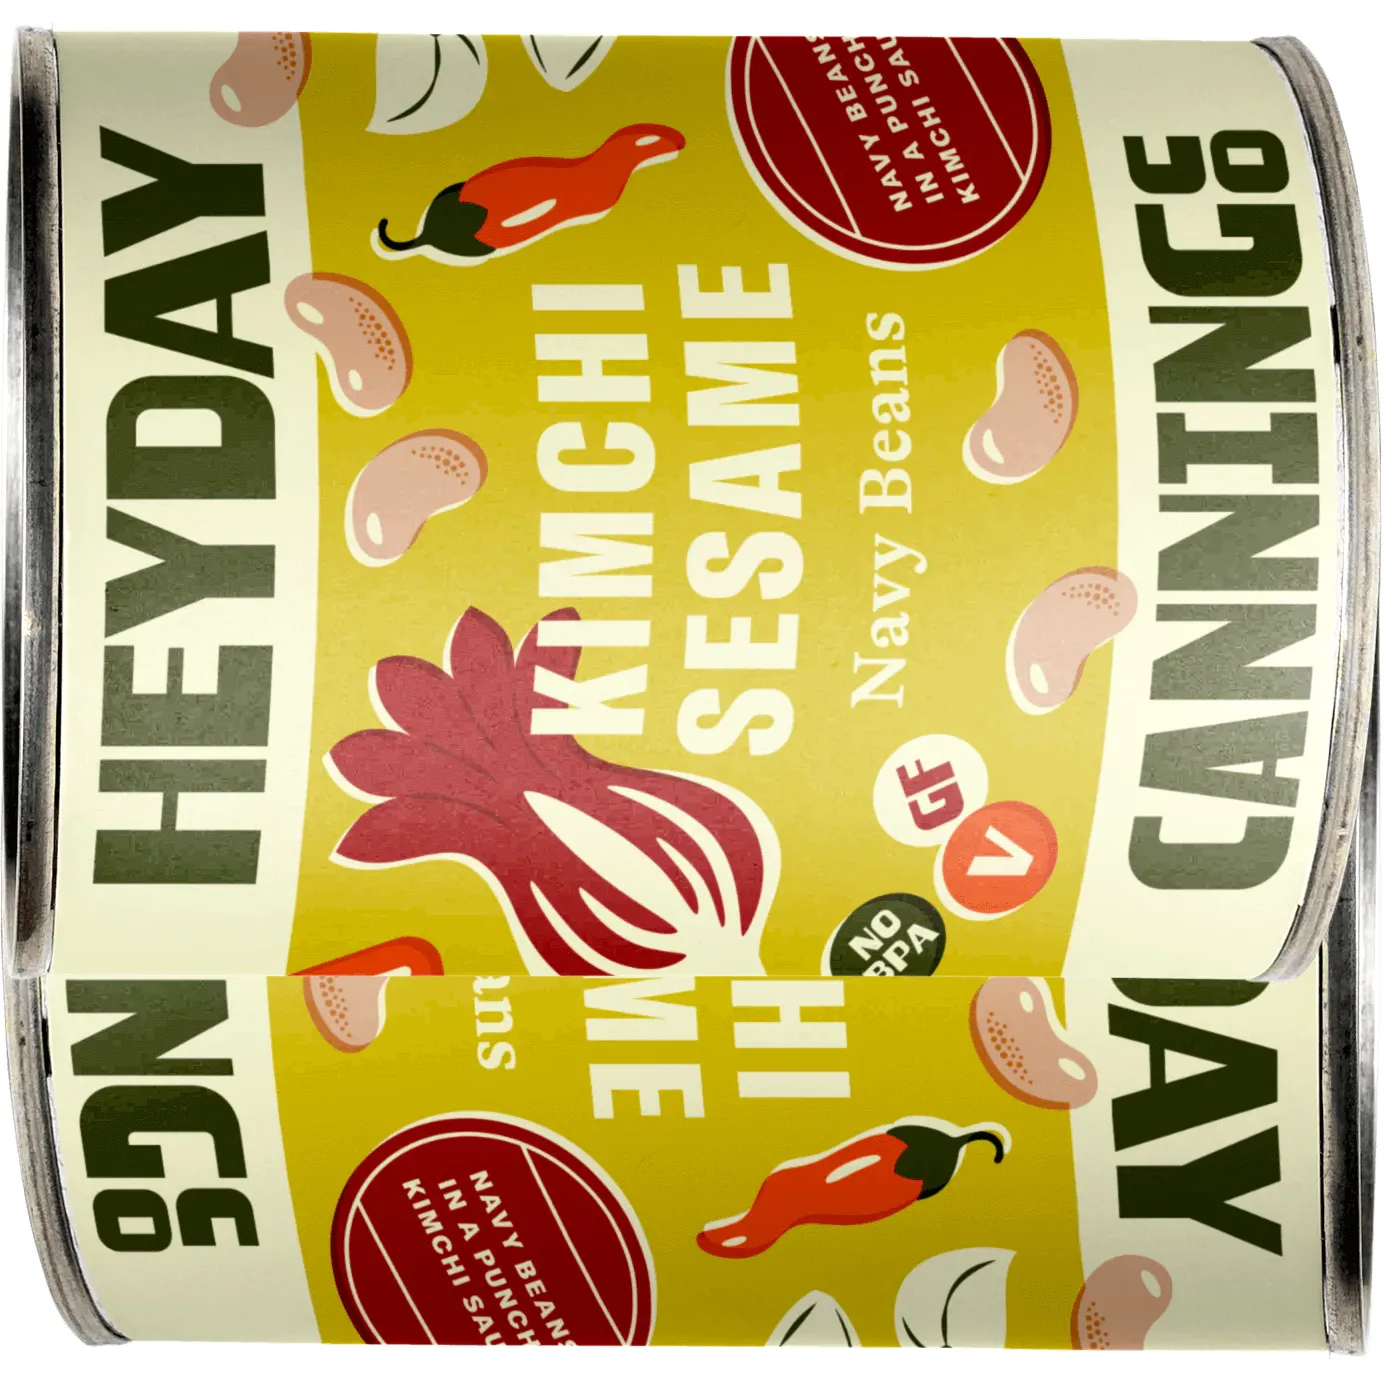 Free Heyday Canning Co. Flavorful Canned Beans